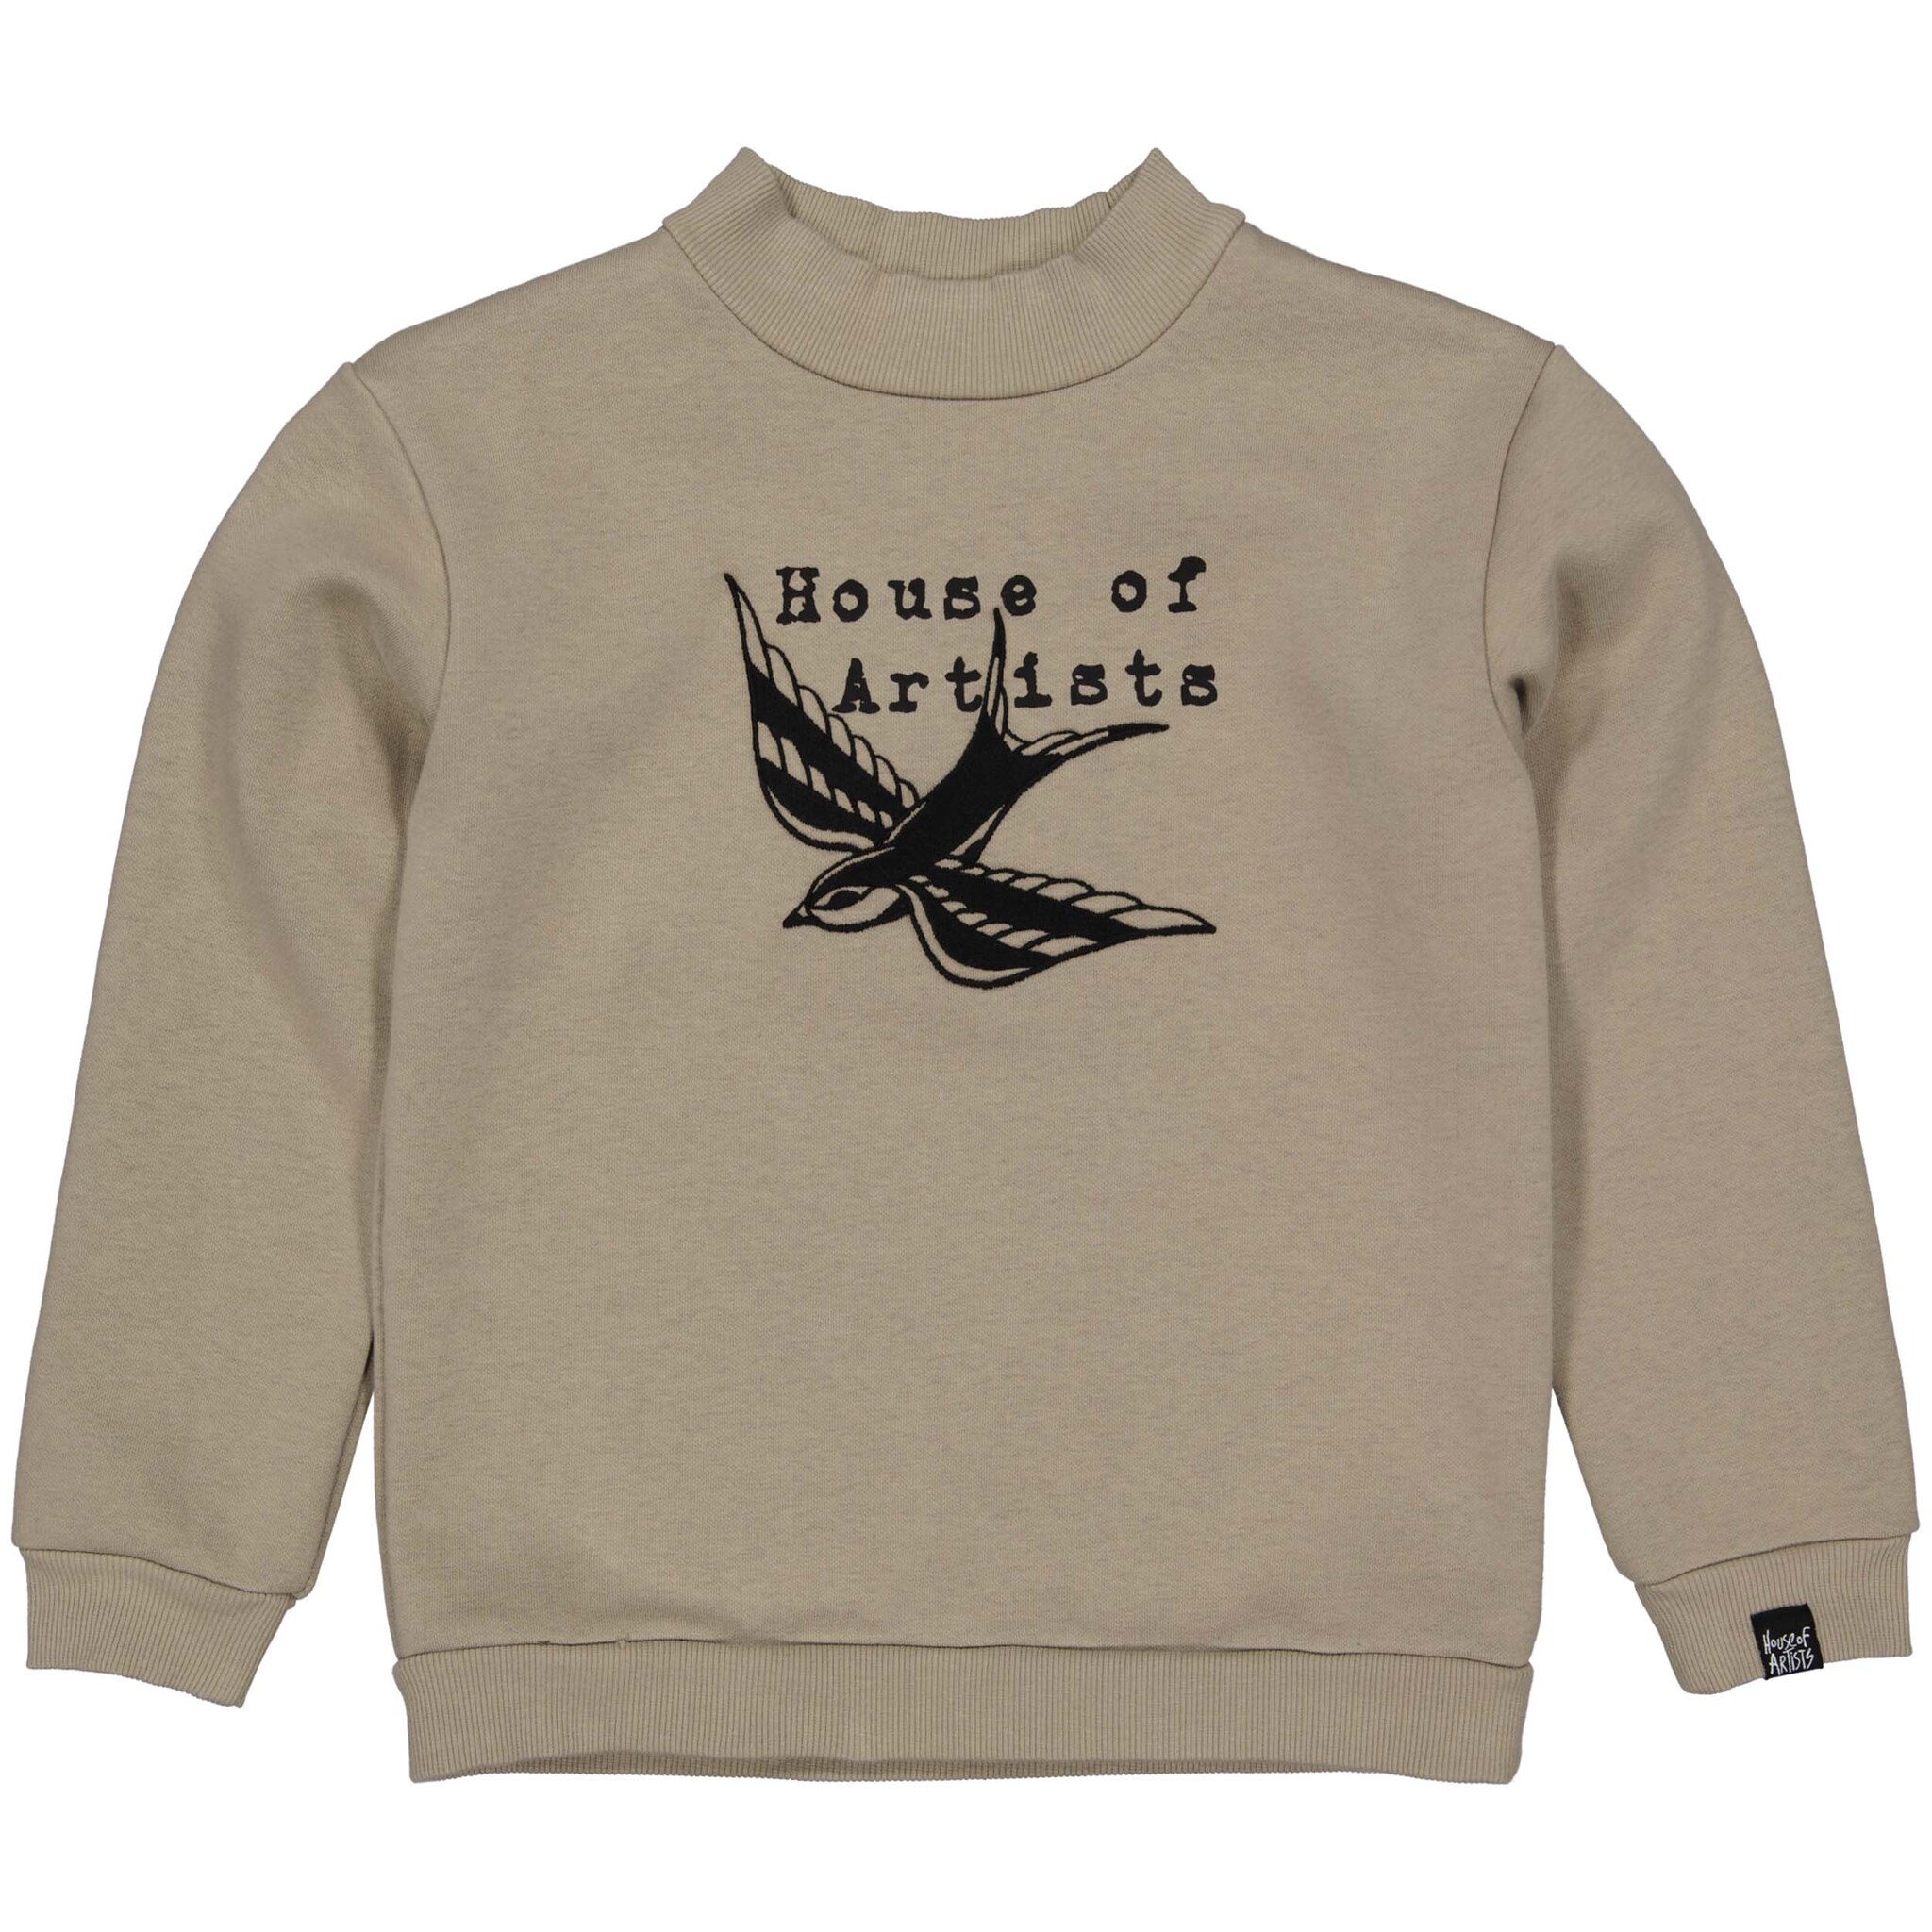 House of artists Sweater - Taupe